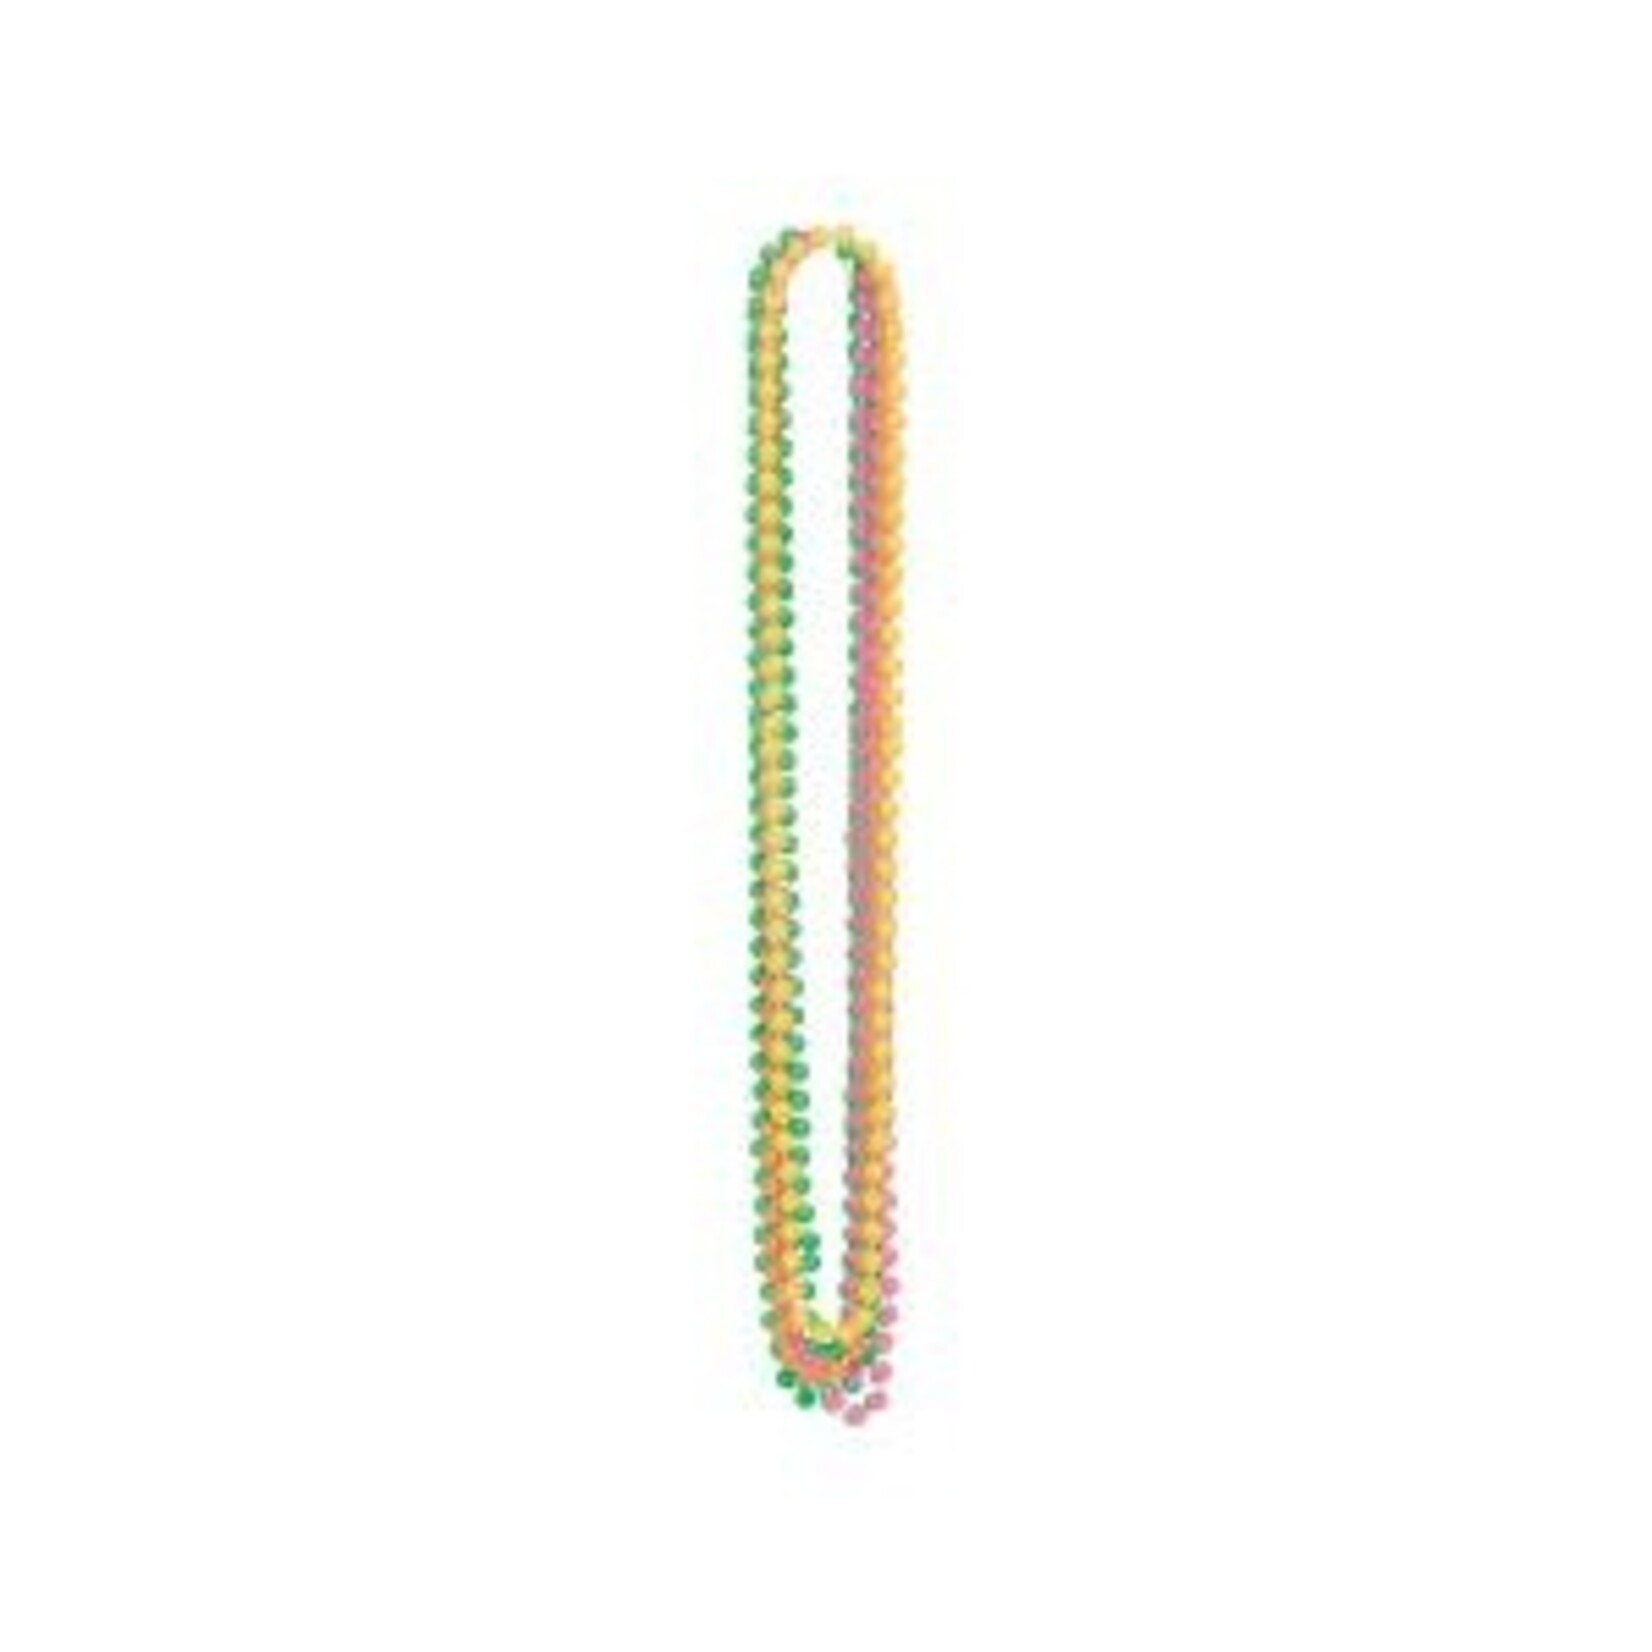 Beistle 33" Neon Party Beads - 6ct.